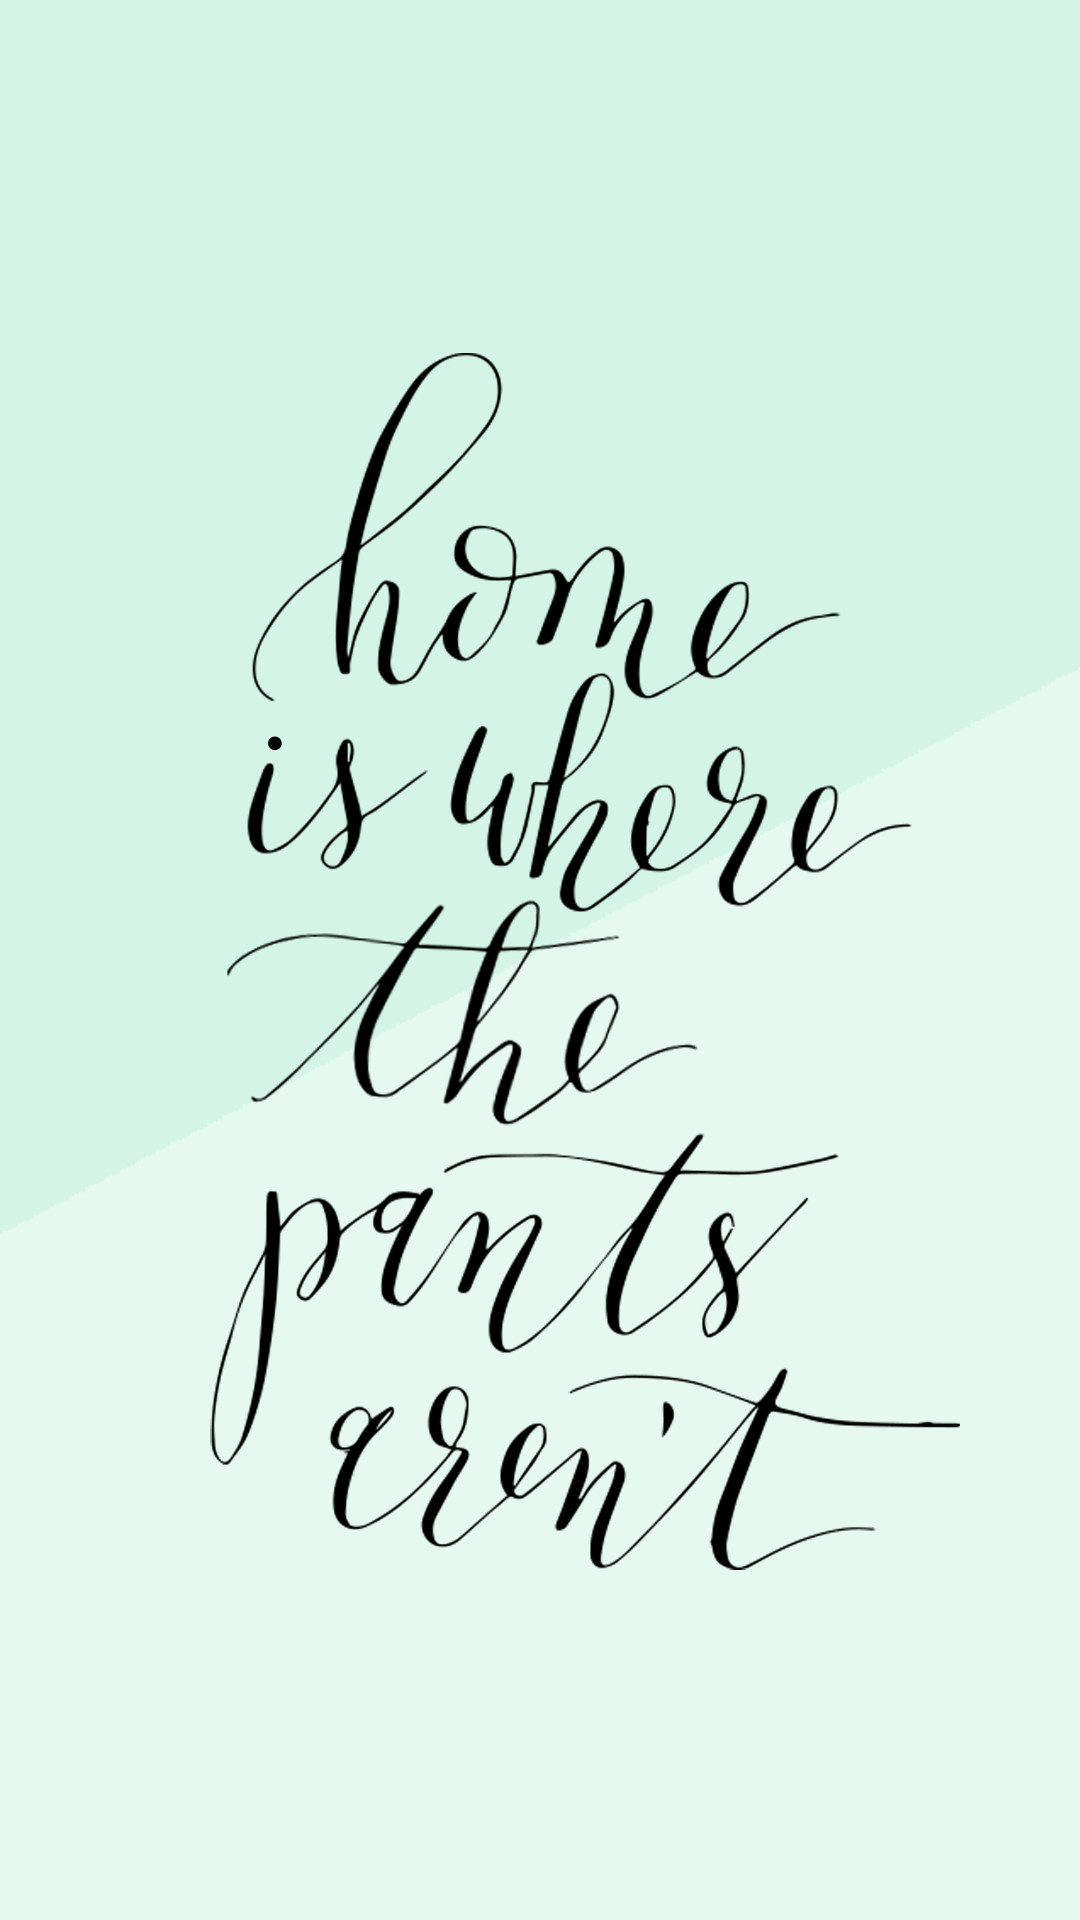 Download your free wallpapers, choose from four calligraphy quotes with  marble textures.